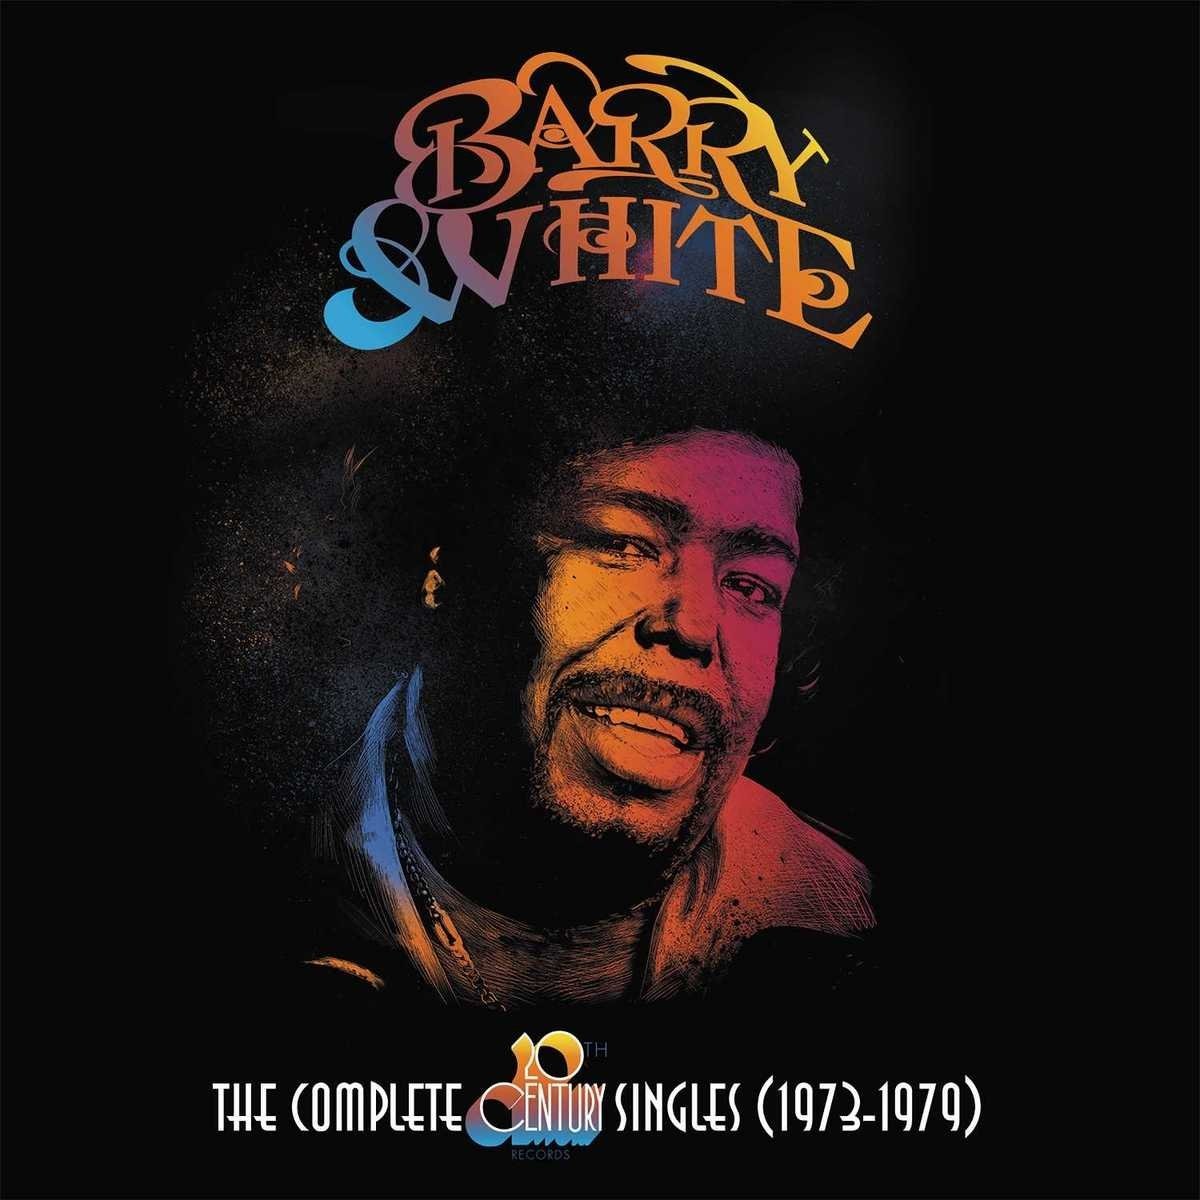 The Complete 20th Century Records Singles 1973-1979 | Barry White